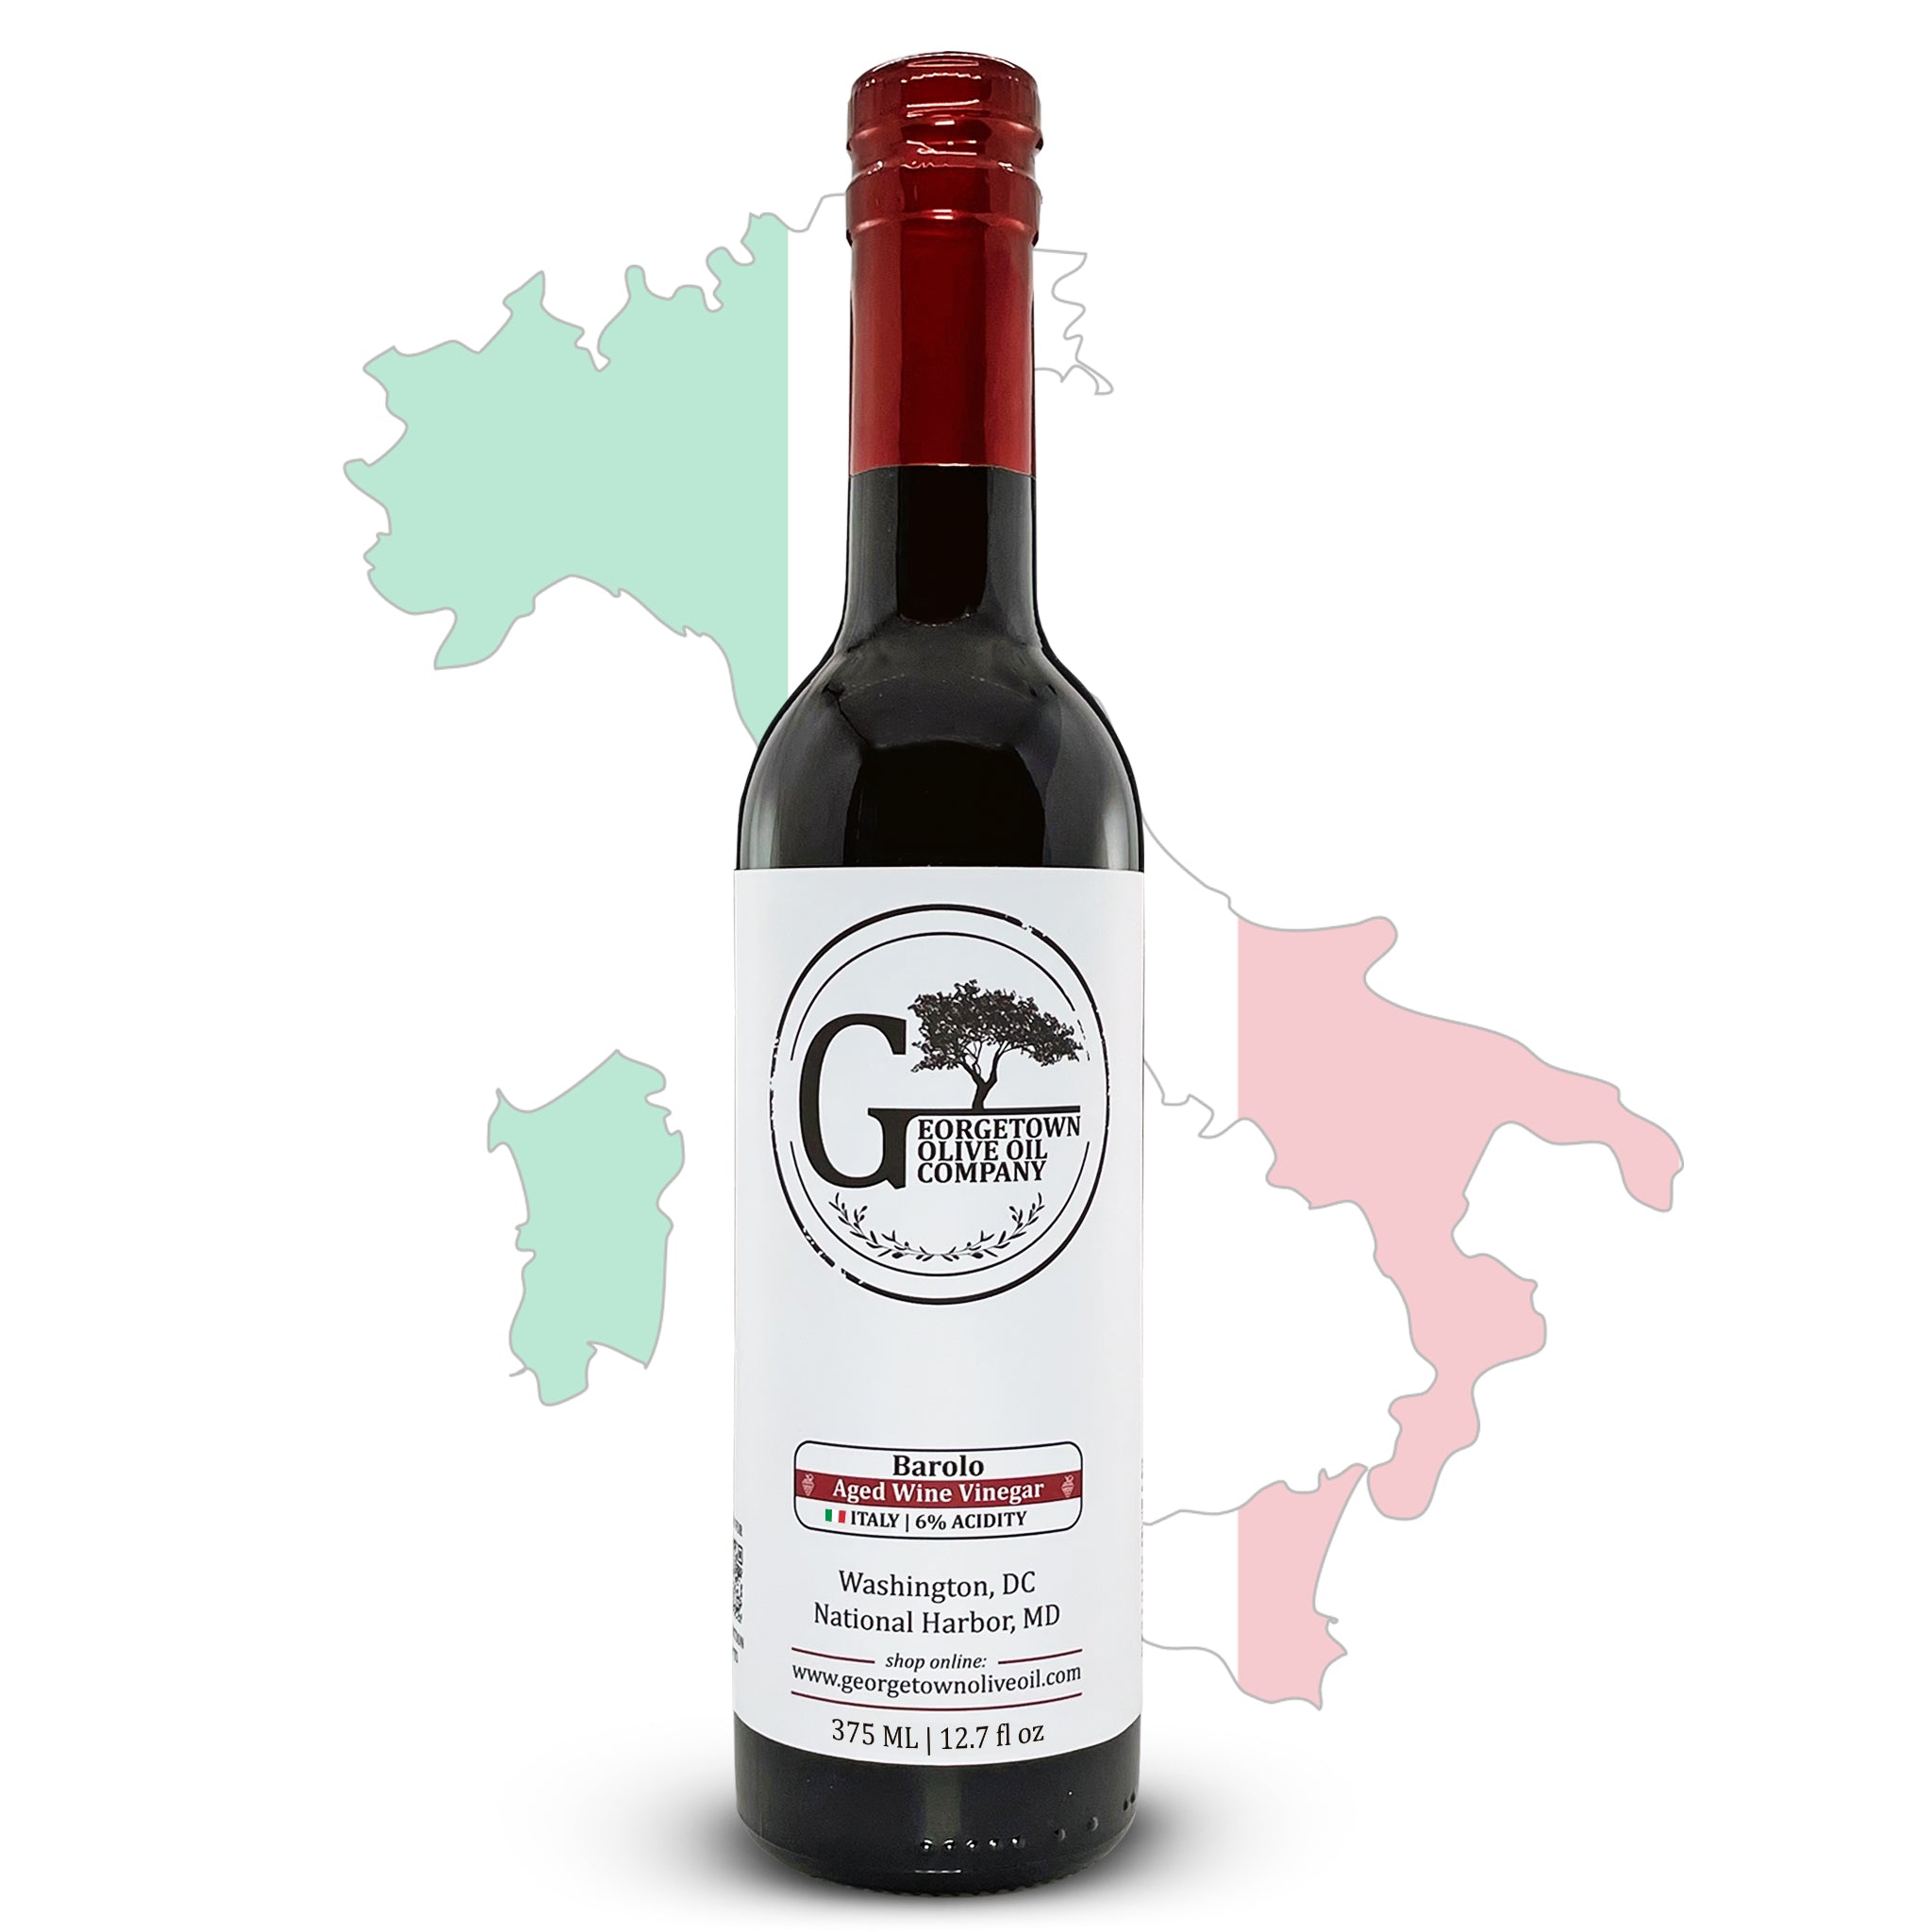 Barolo Aged Red Wine Vinegar (ITALY) - Georgetown Olive Oil Co.